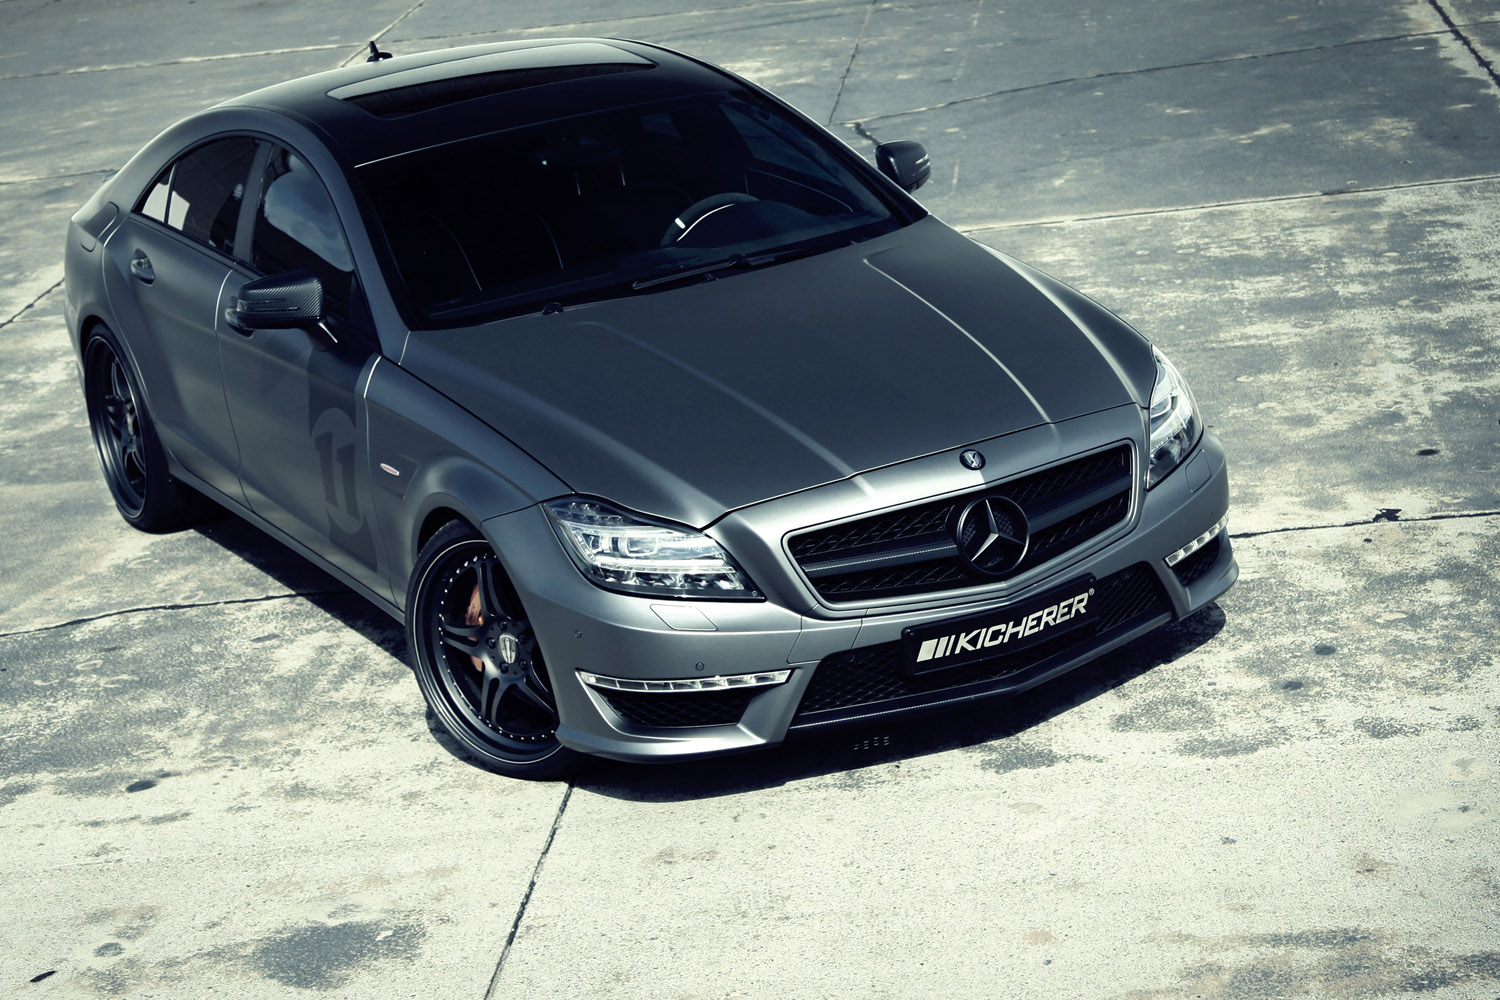 Kicherer Mercedes CLS 63 AMG Yachting